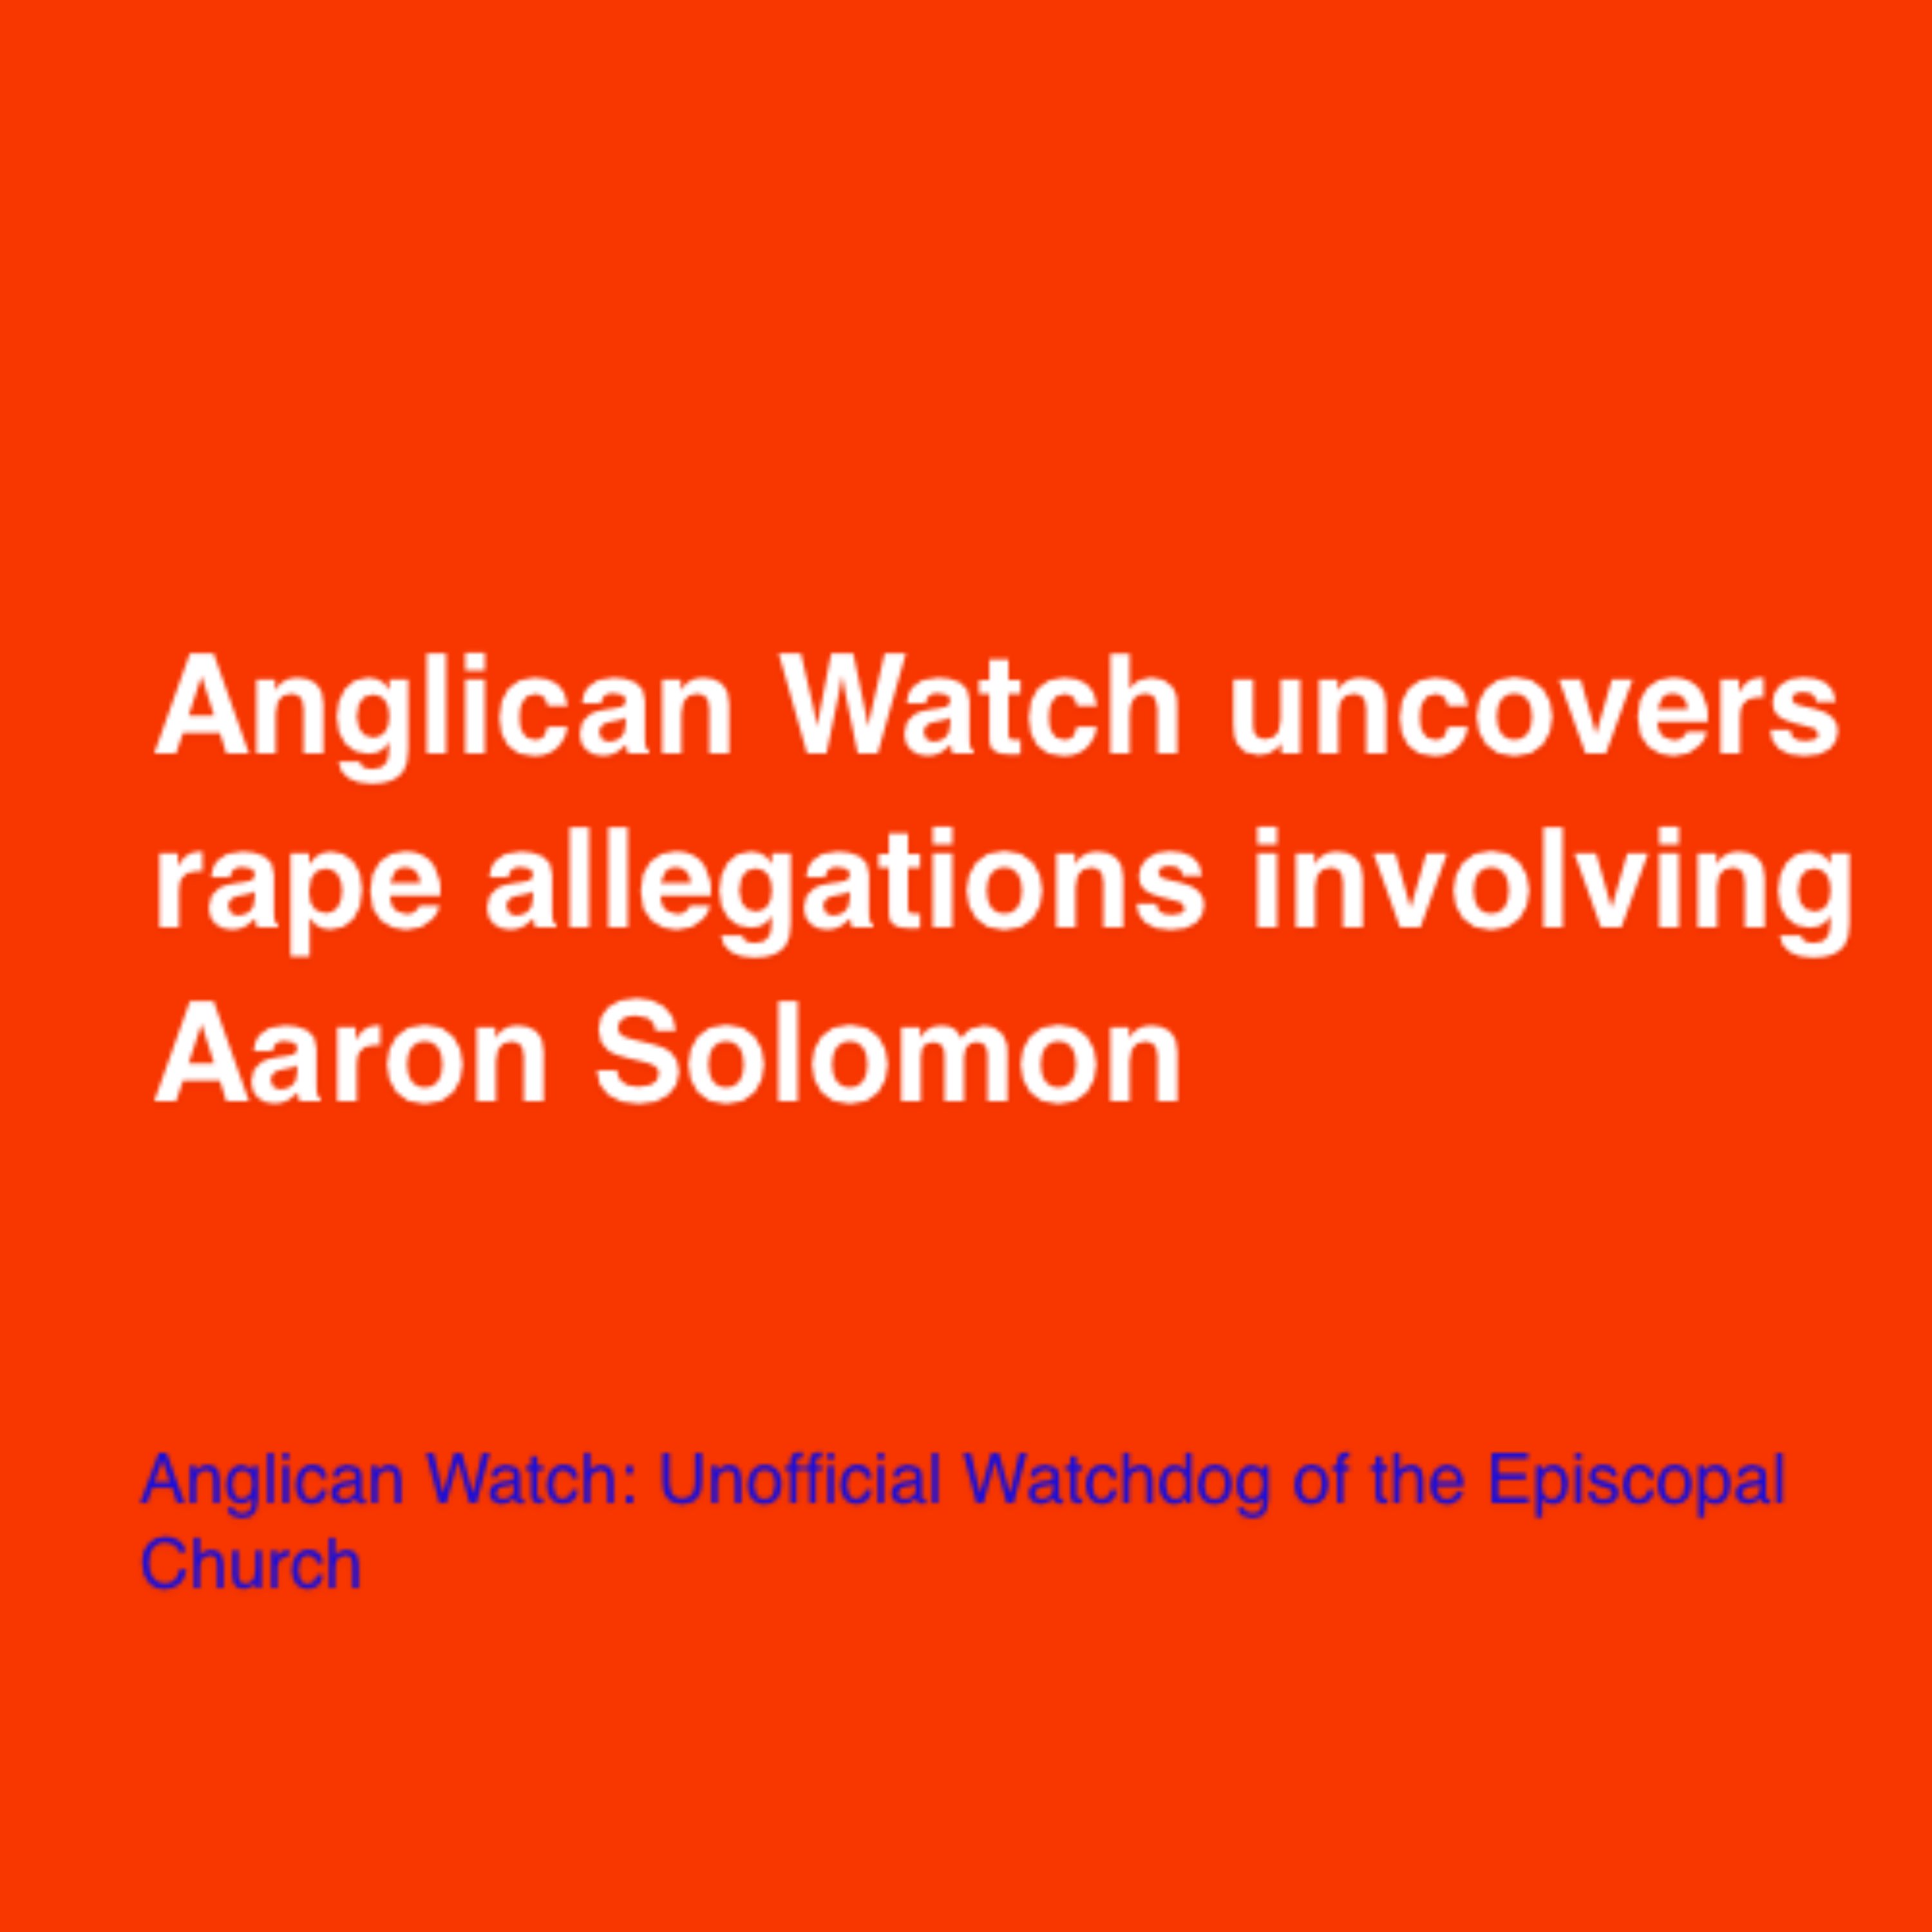 Anglican Watch uncovers rape allegations involving Aaron Solomon